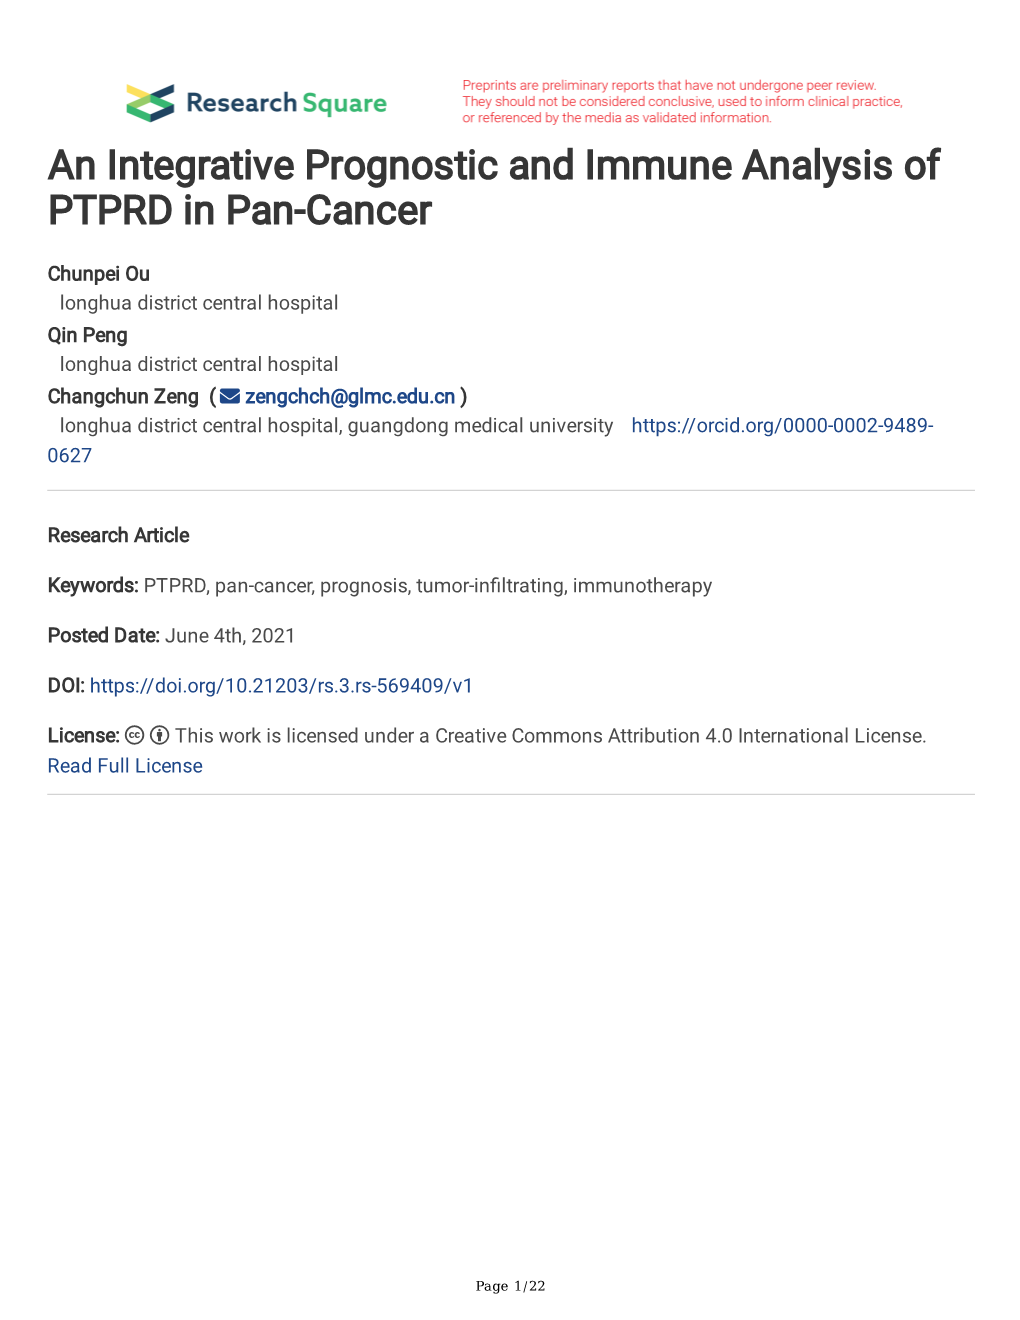 An Integrative Prognostic and Immune Analysis of PTPRD in Pan-Cancer